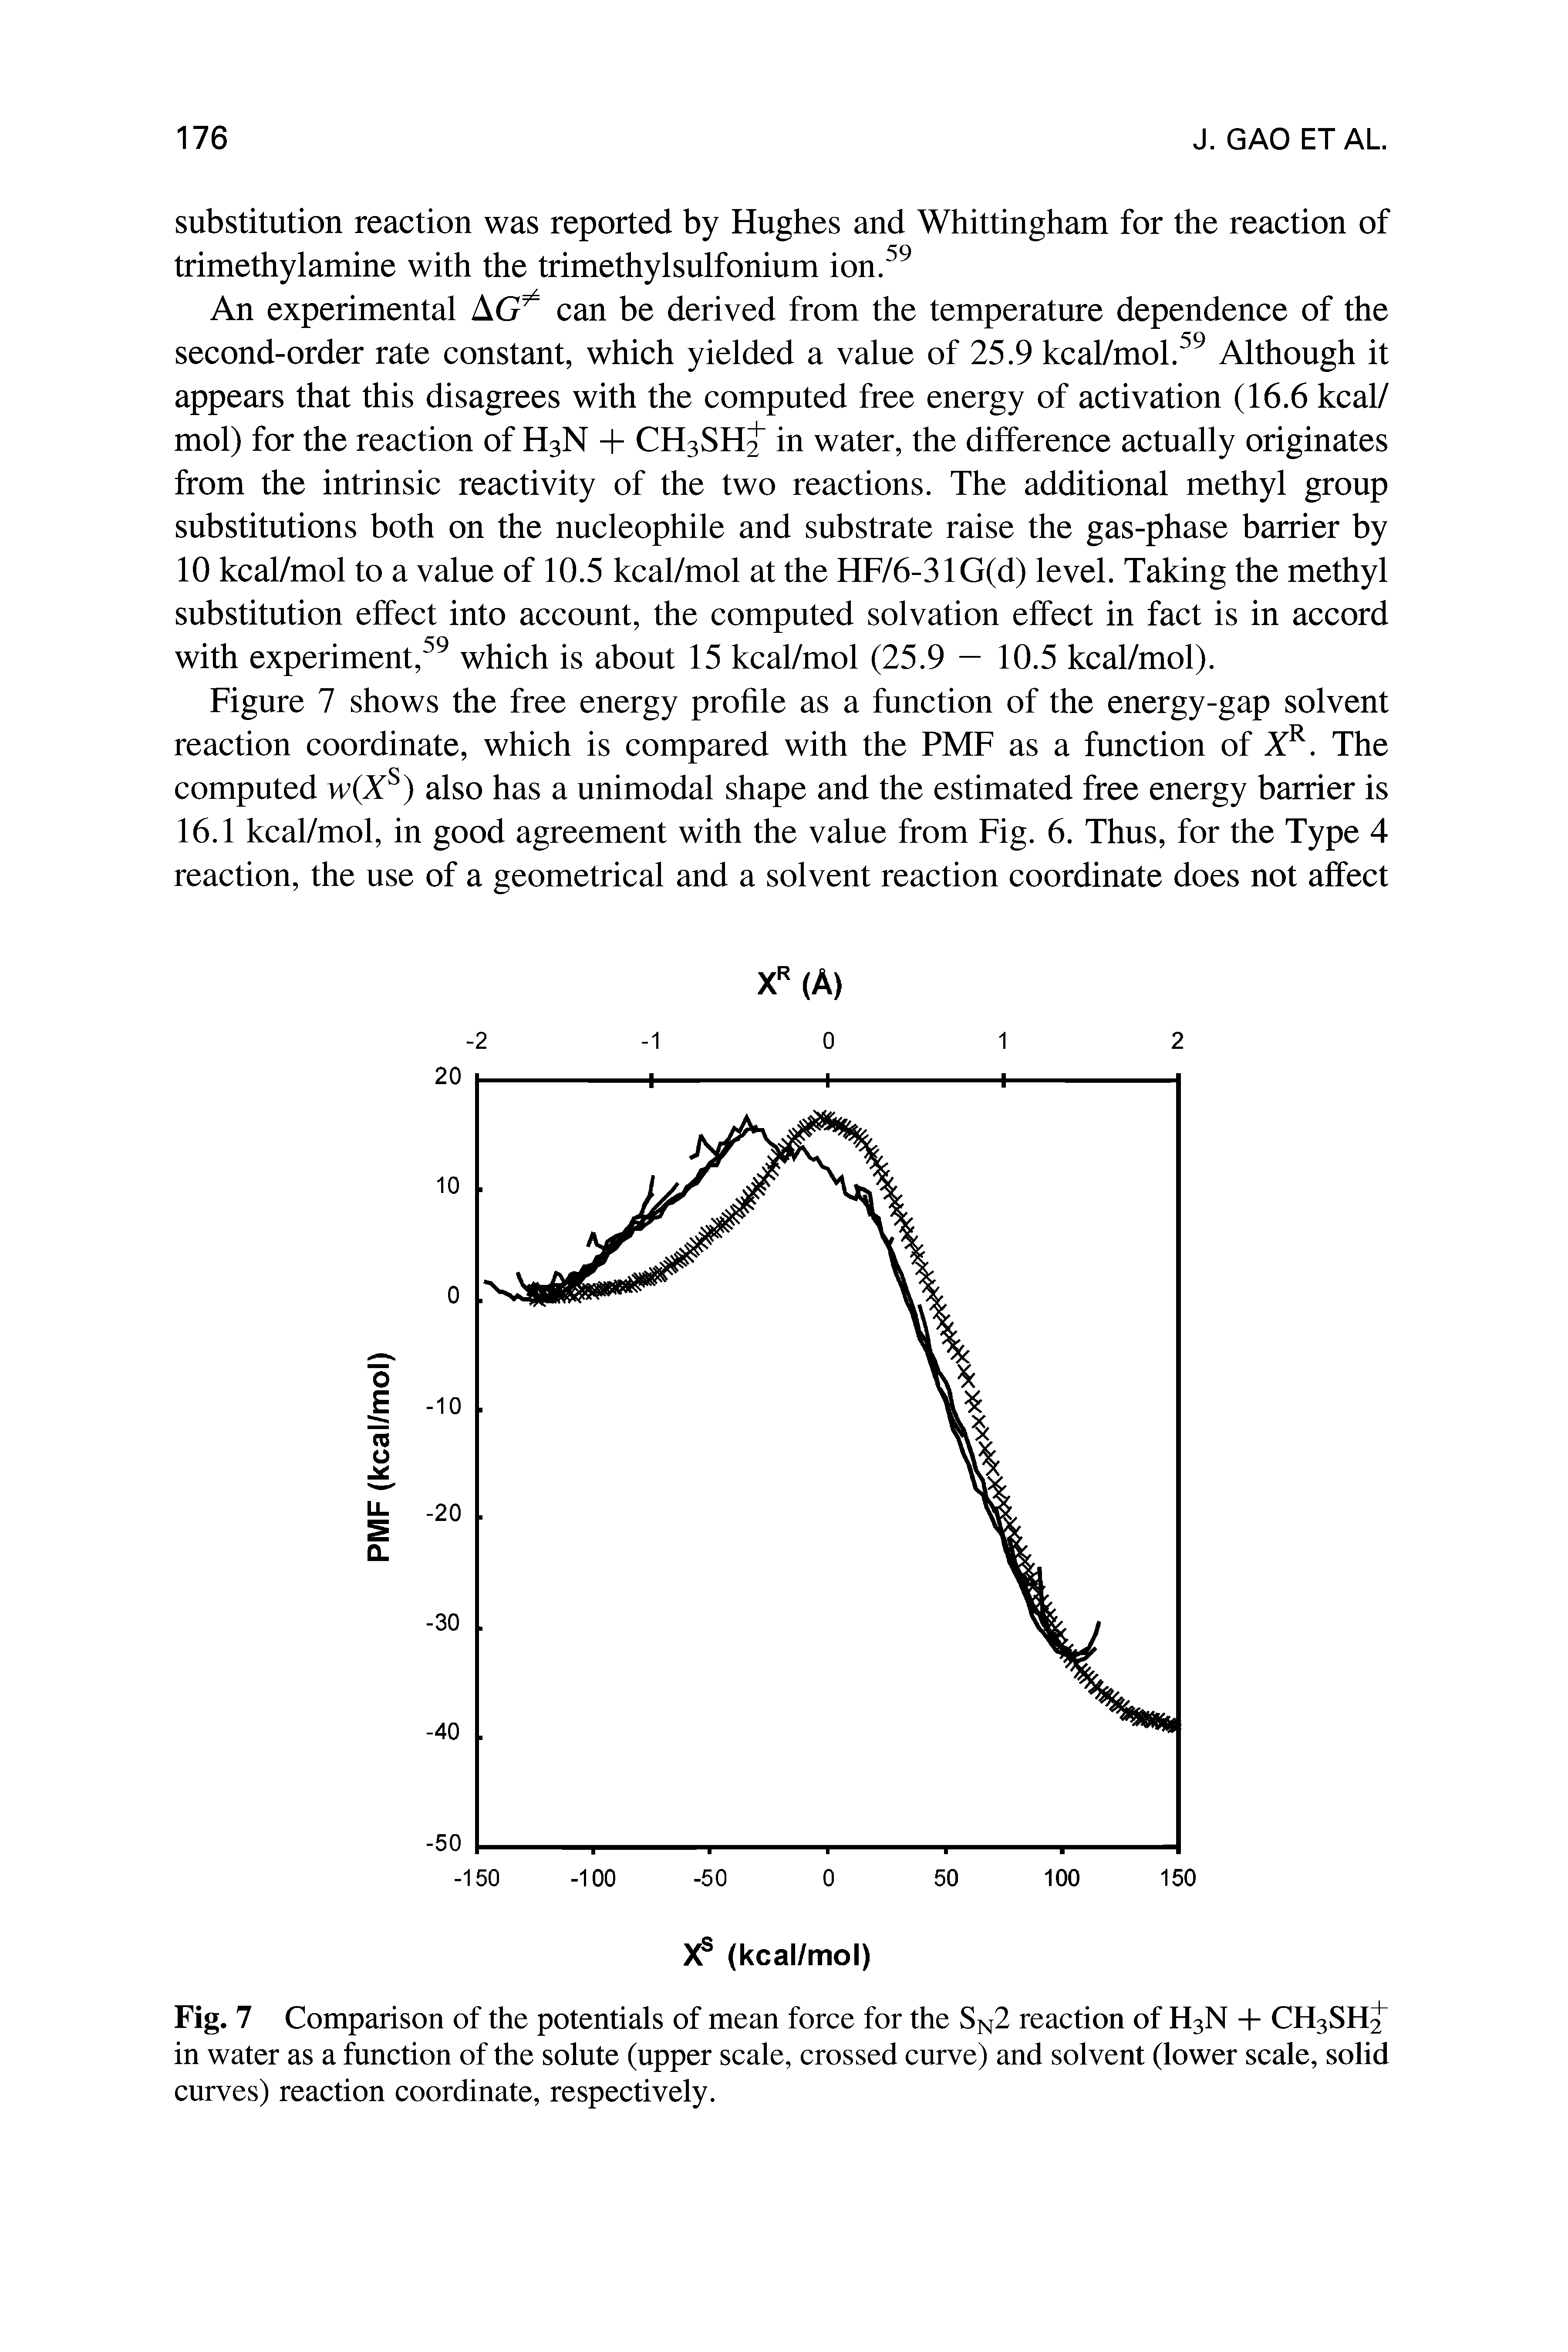 Figure 7 shows the free energy profile as a function of the energy-gap solvent reaction coordinate, which is compared with the PMF as a function of XR. The computed w(Xs) also has a unimodal shape and the estimated free energy barrier is 16.1 kcal/mol, in good agreement with the value from Fig. 6. Thus, for the Type 4 reaction, the use of a geometrical and a solvent reaction coordinate does not affect...